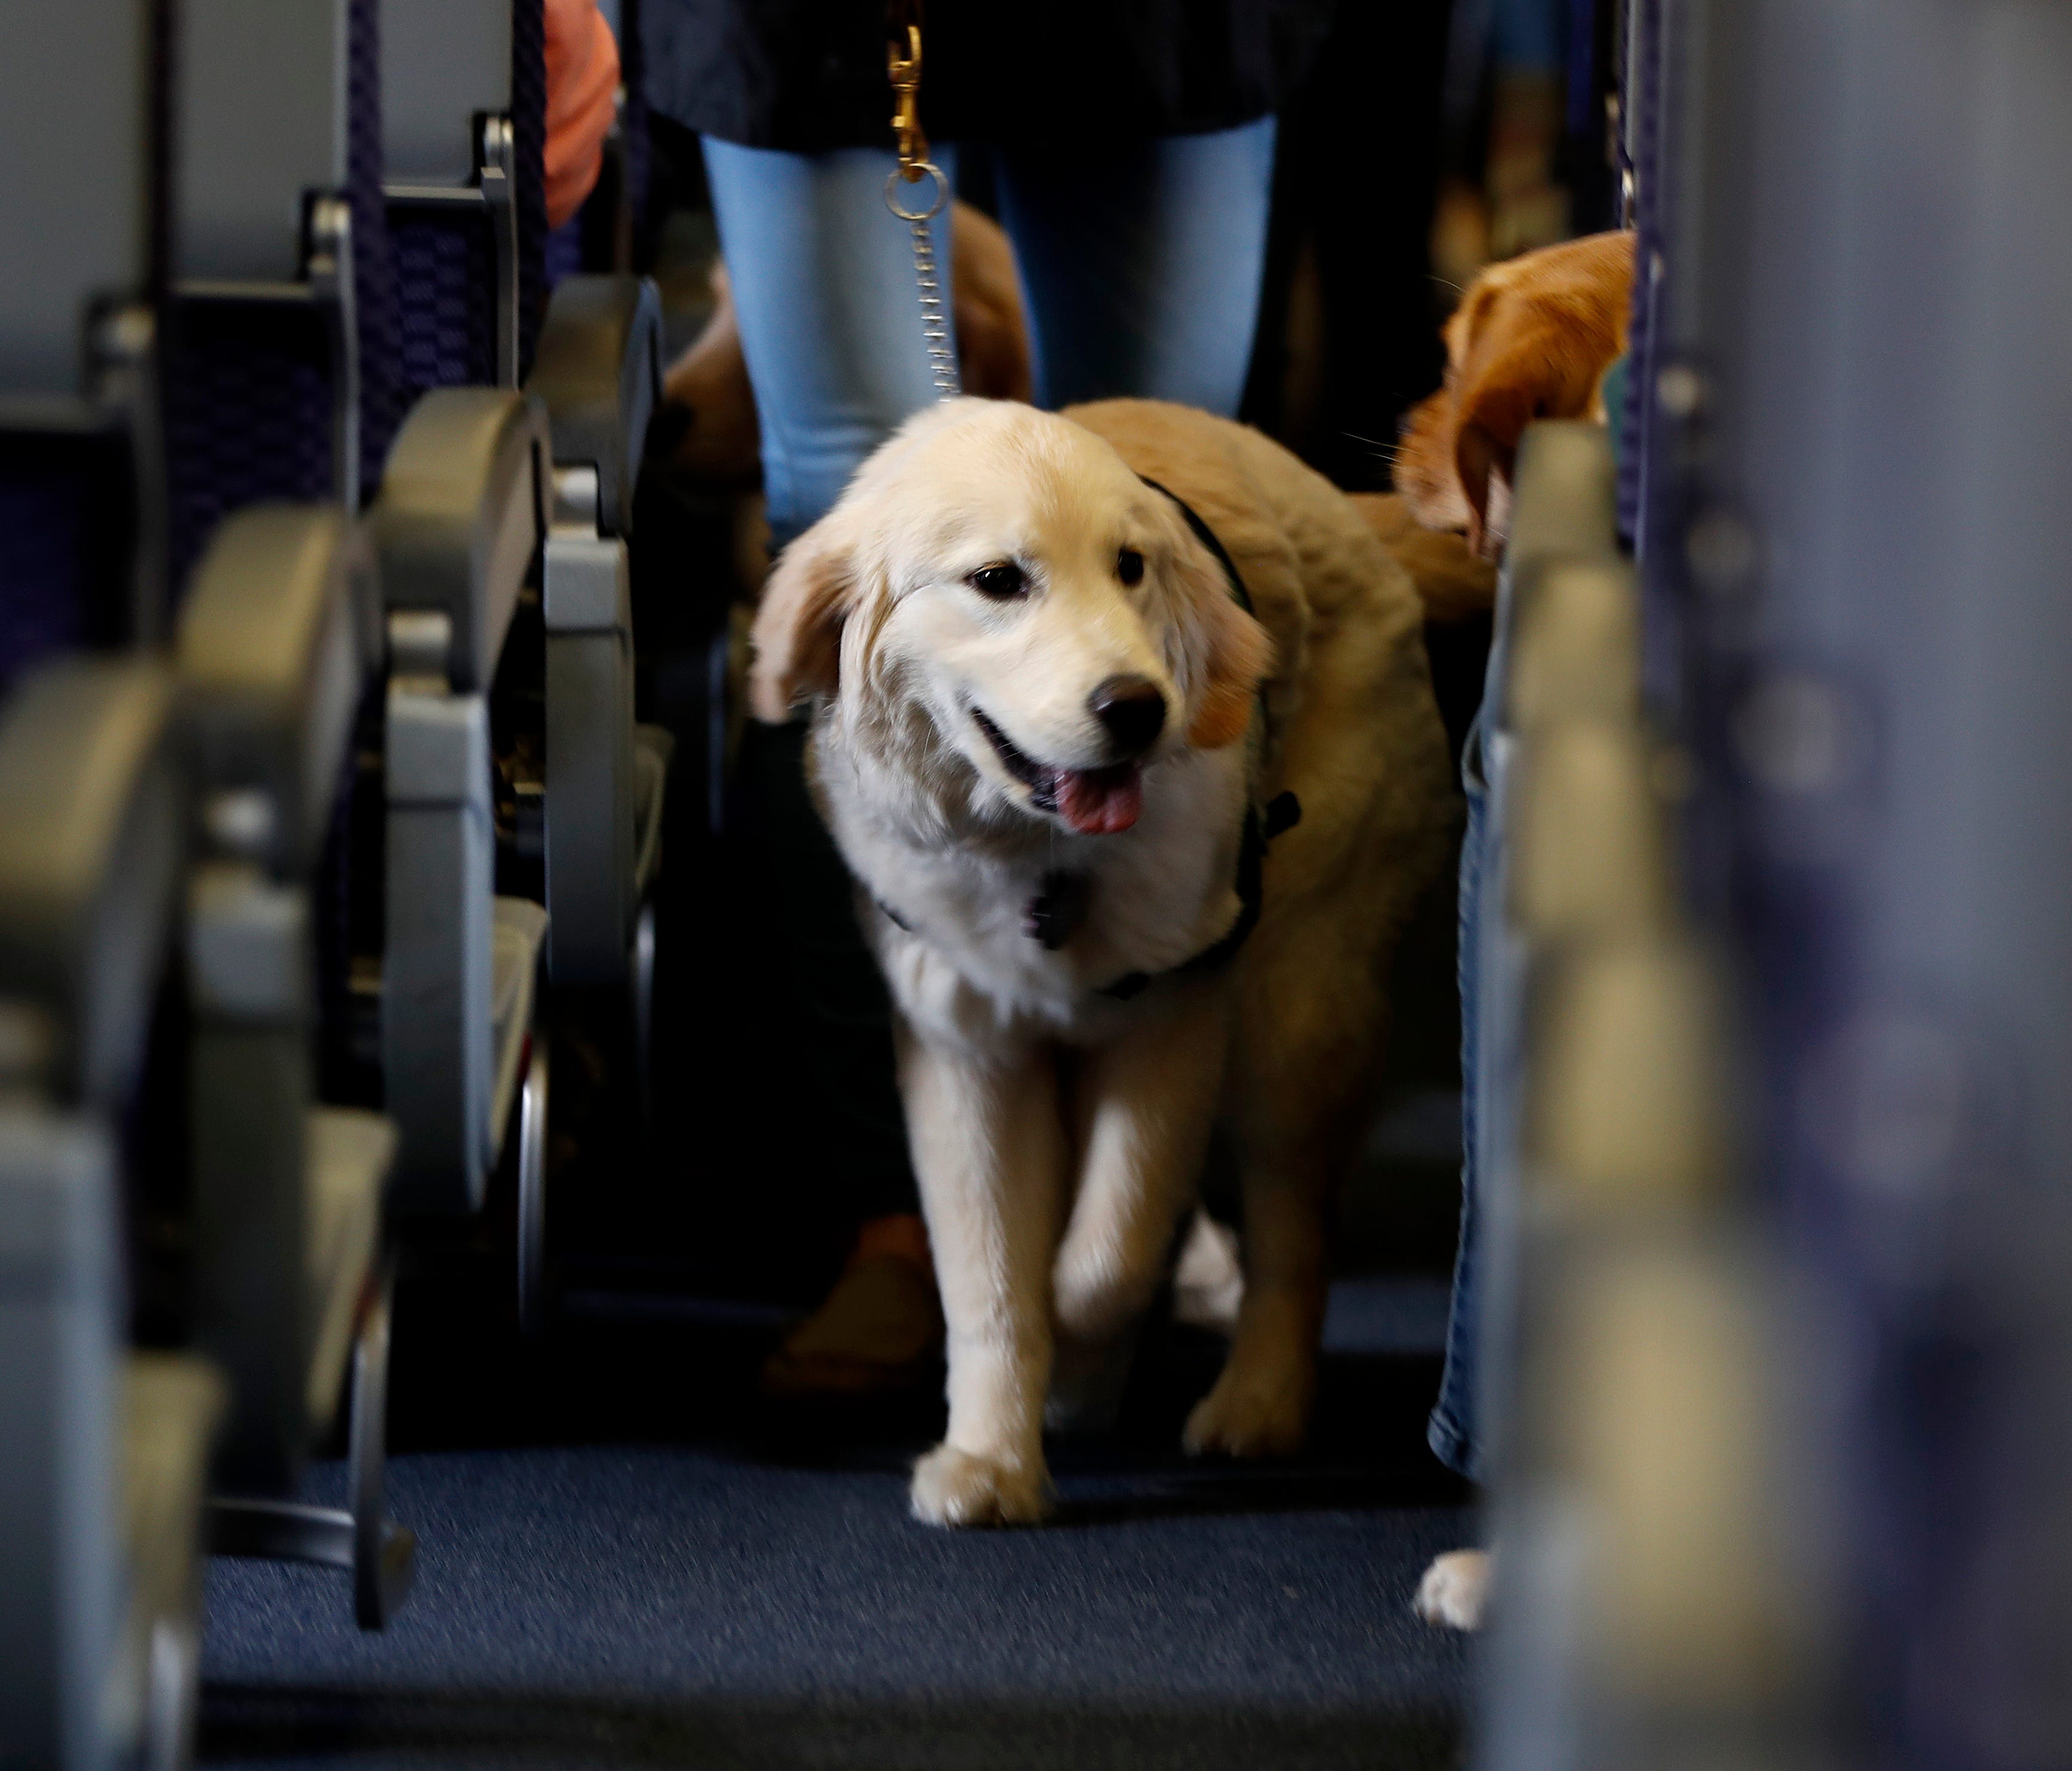 A service dog strolls April 1, 2017, down the aisle of a United Airlines plane at Newark Liberty International Airport while taking part in a training exercise, in Newark, N.J.